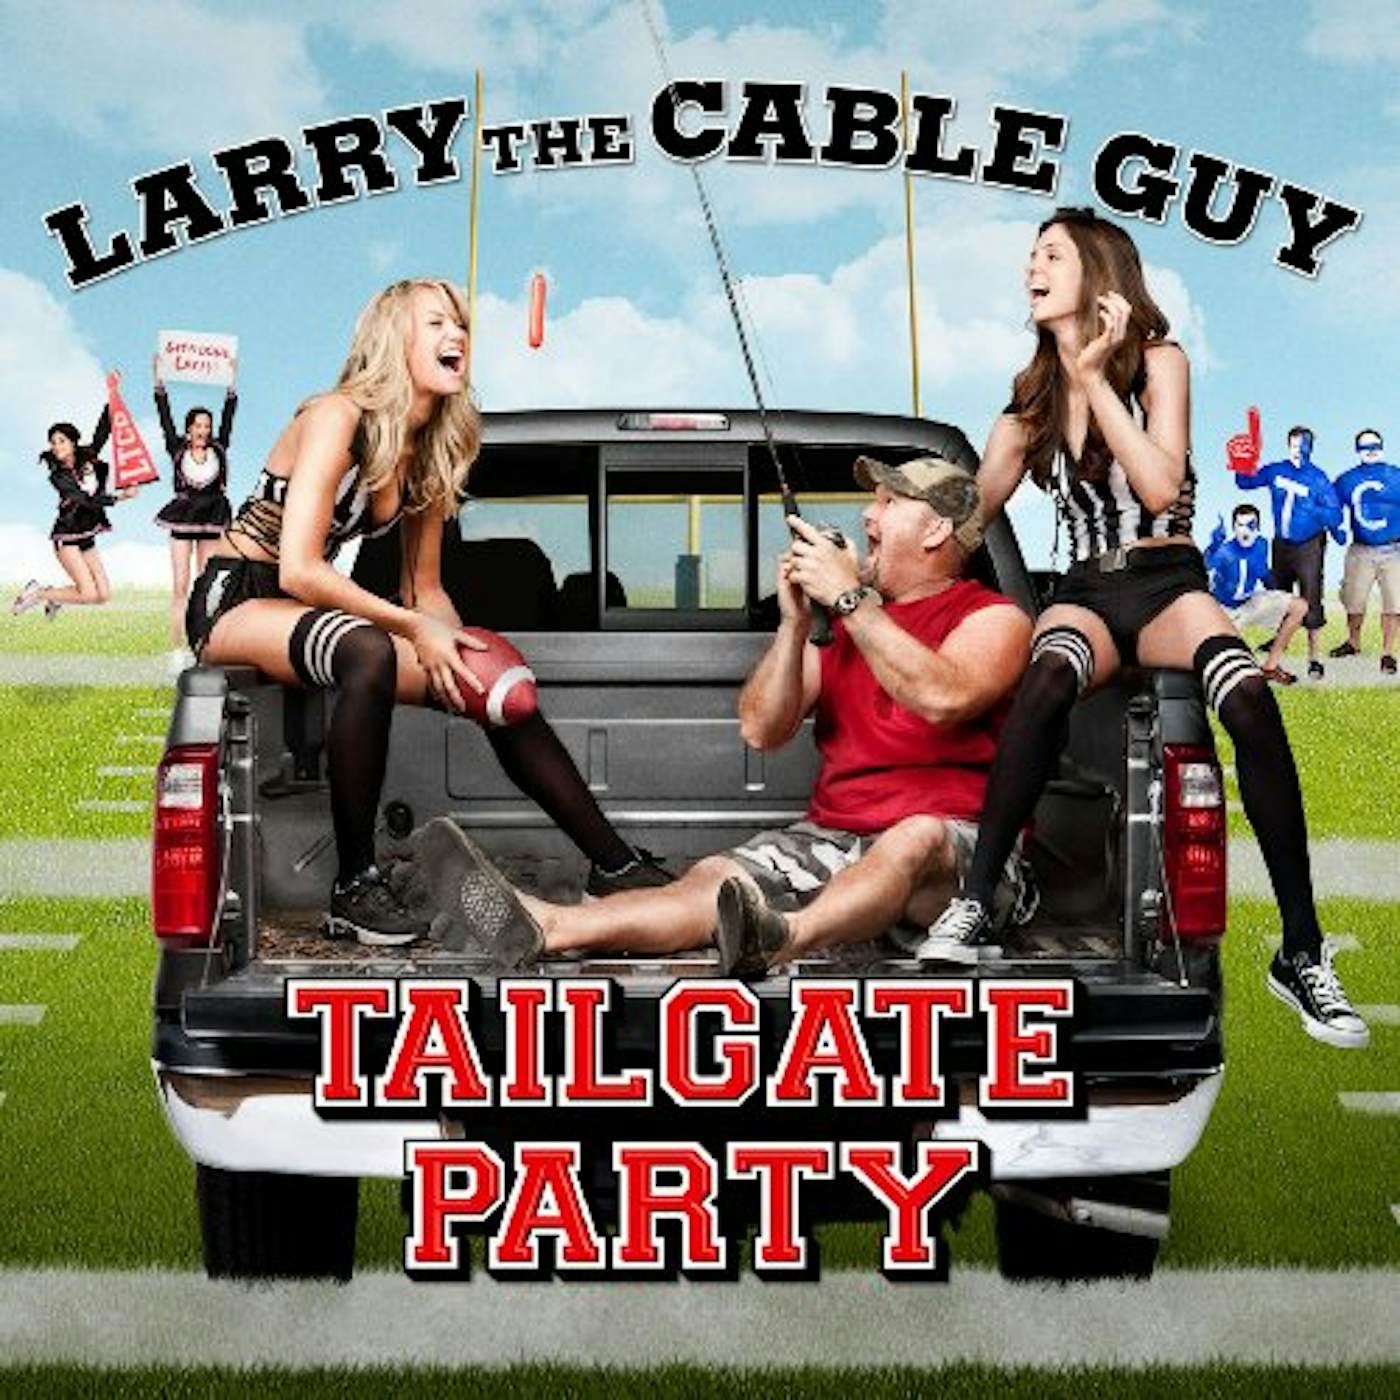 Larry The Cable Guy TAILGATE PARTY CD